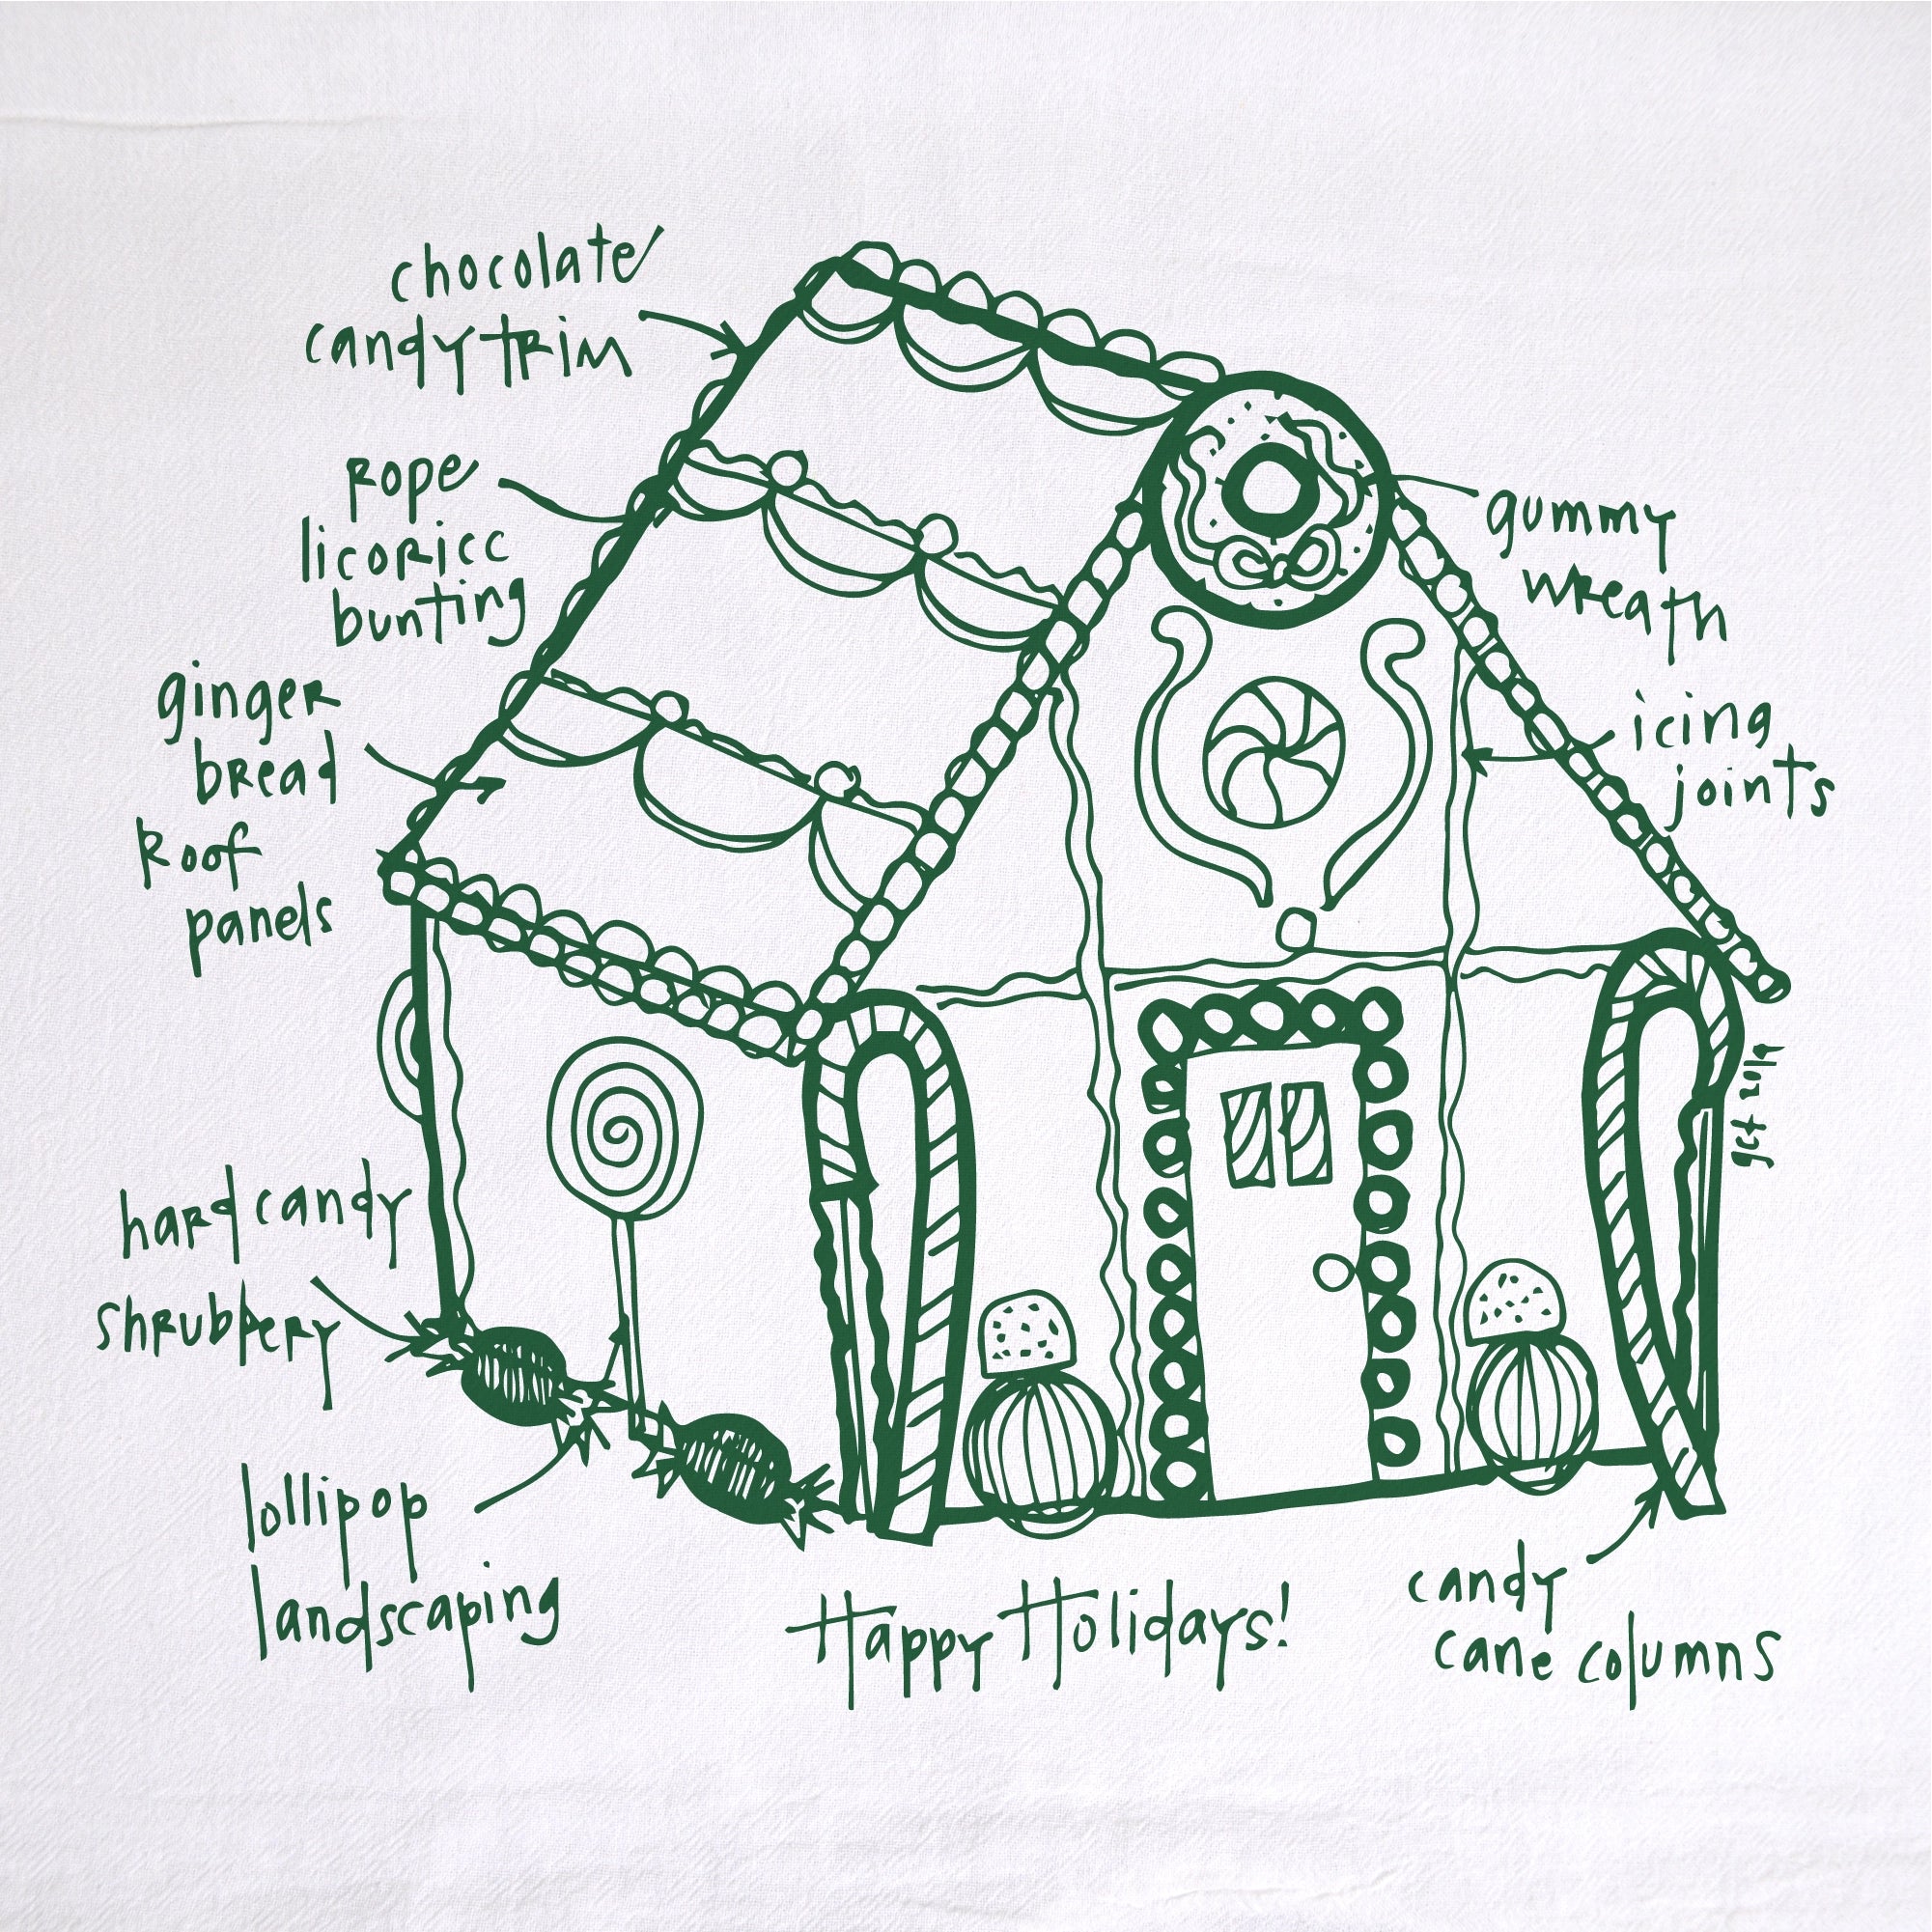 picture of drawing on gingerbread tea towel. Ink is in green and shows gingerbread house details. House has lollipops on the side, gum drops, candy canes, and icing rope bunting 